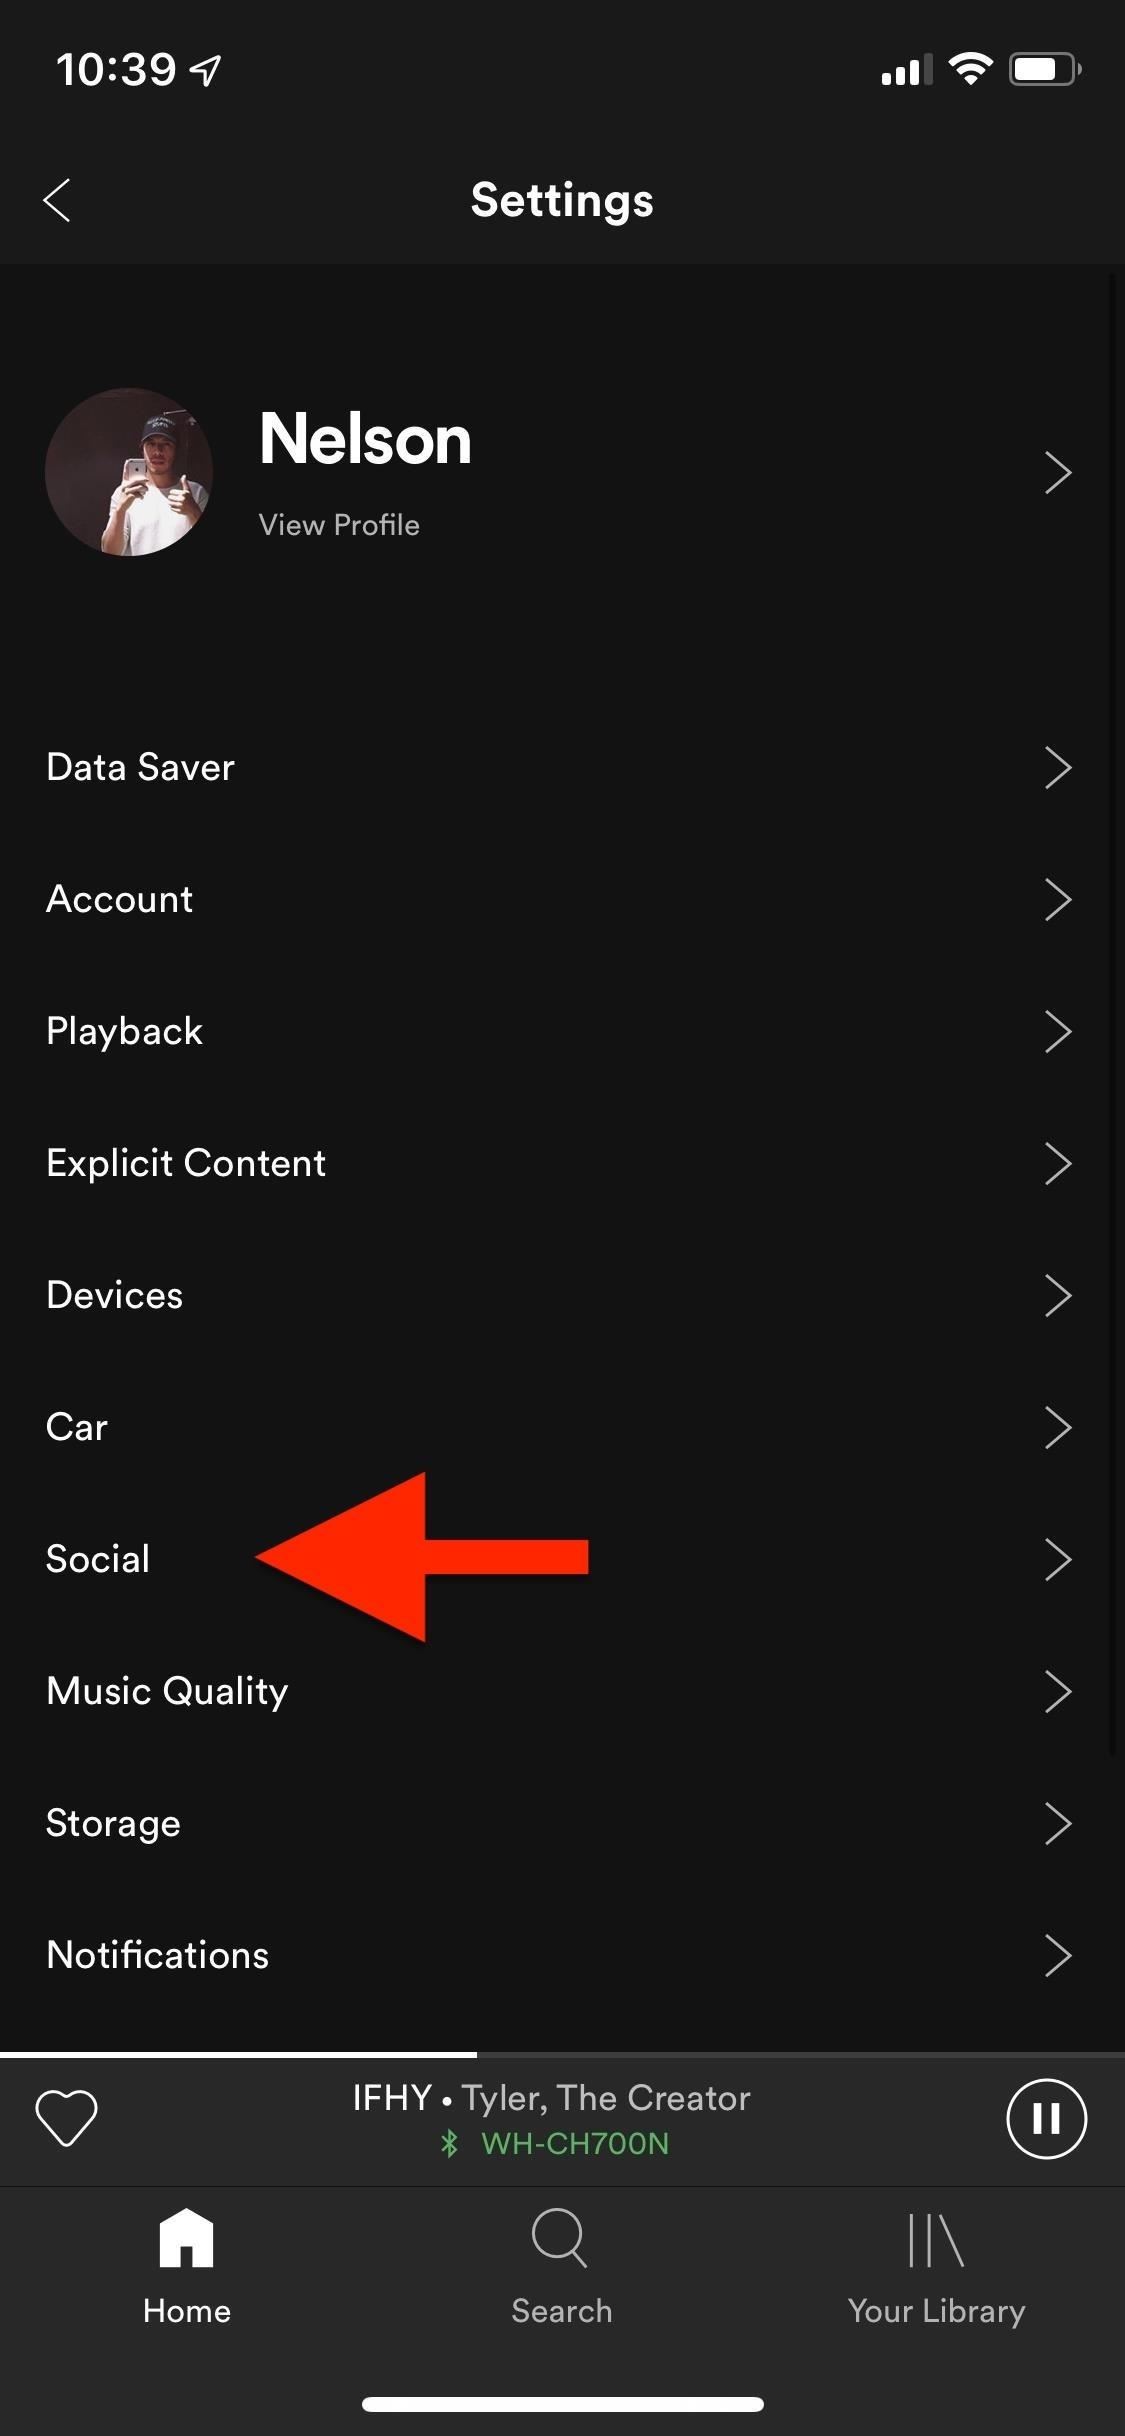 How to Hide What You're Listening To on Spotify So Your Friends Don't Make Fun of You